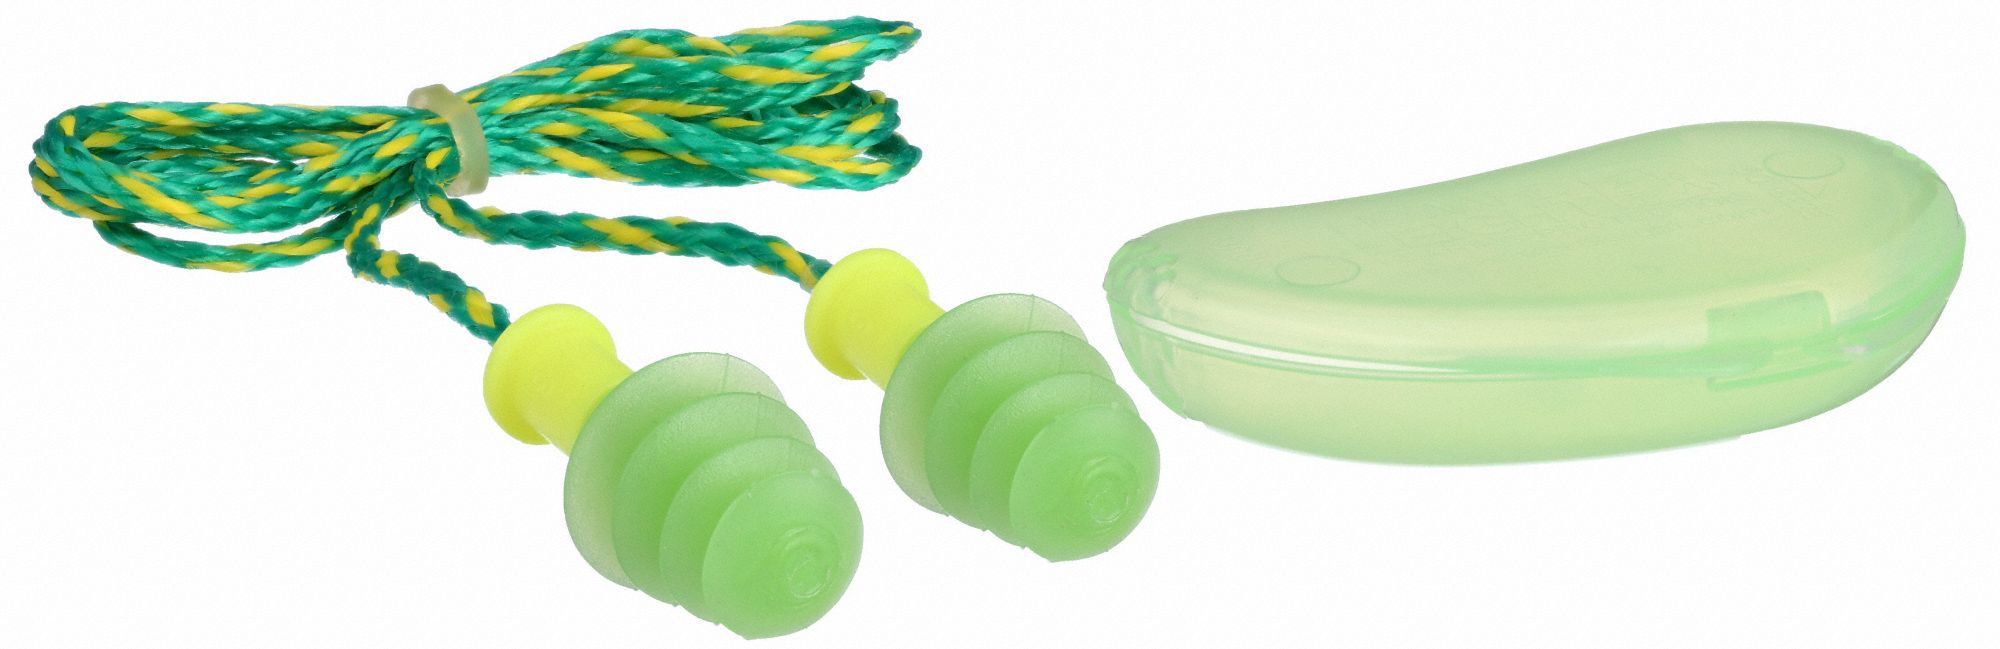 EARPLUGS, REUSABLE, YLW, TPE/PVC, SMALL, 4-FLANGED, 27DB, CORDED, PUSH-IN, CSA